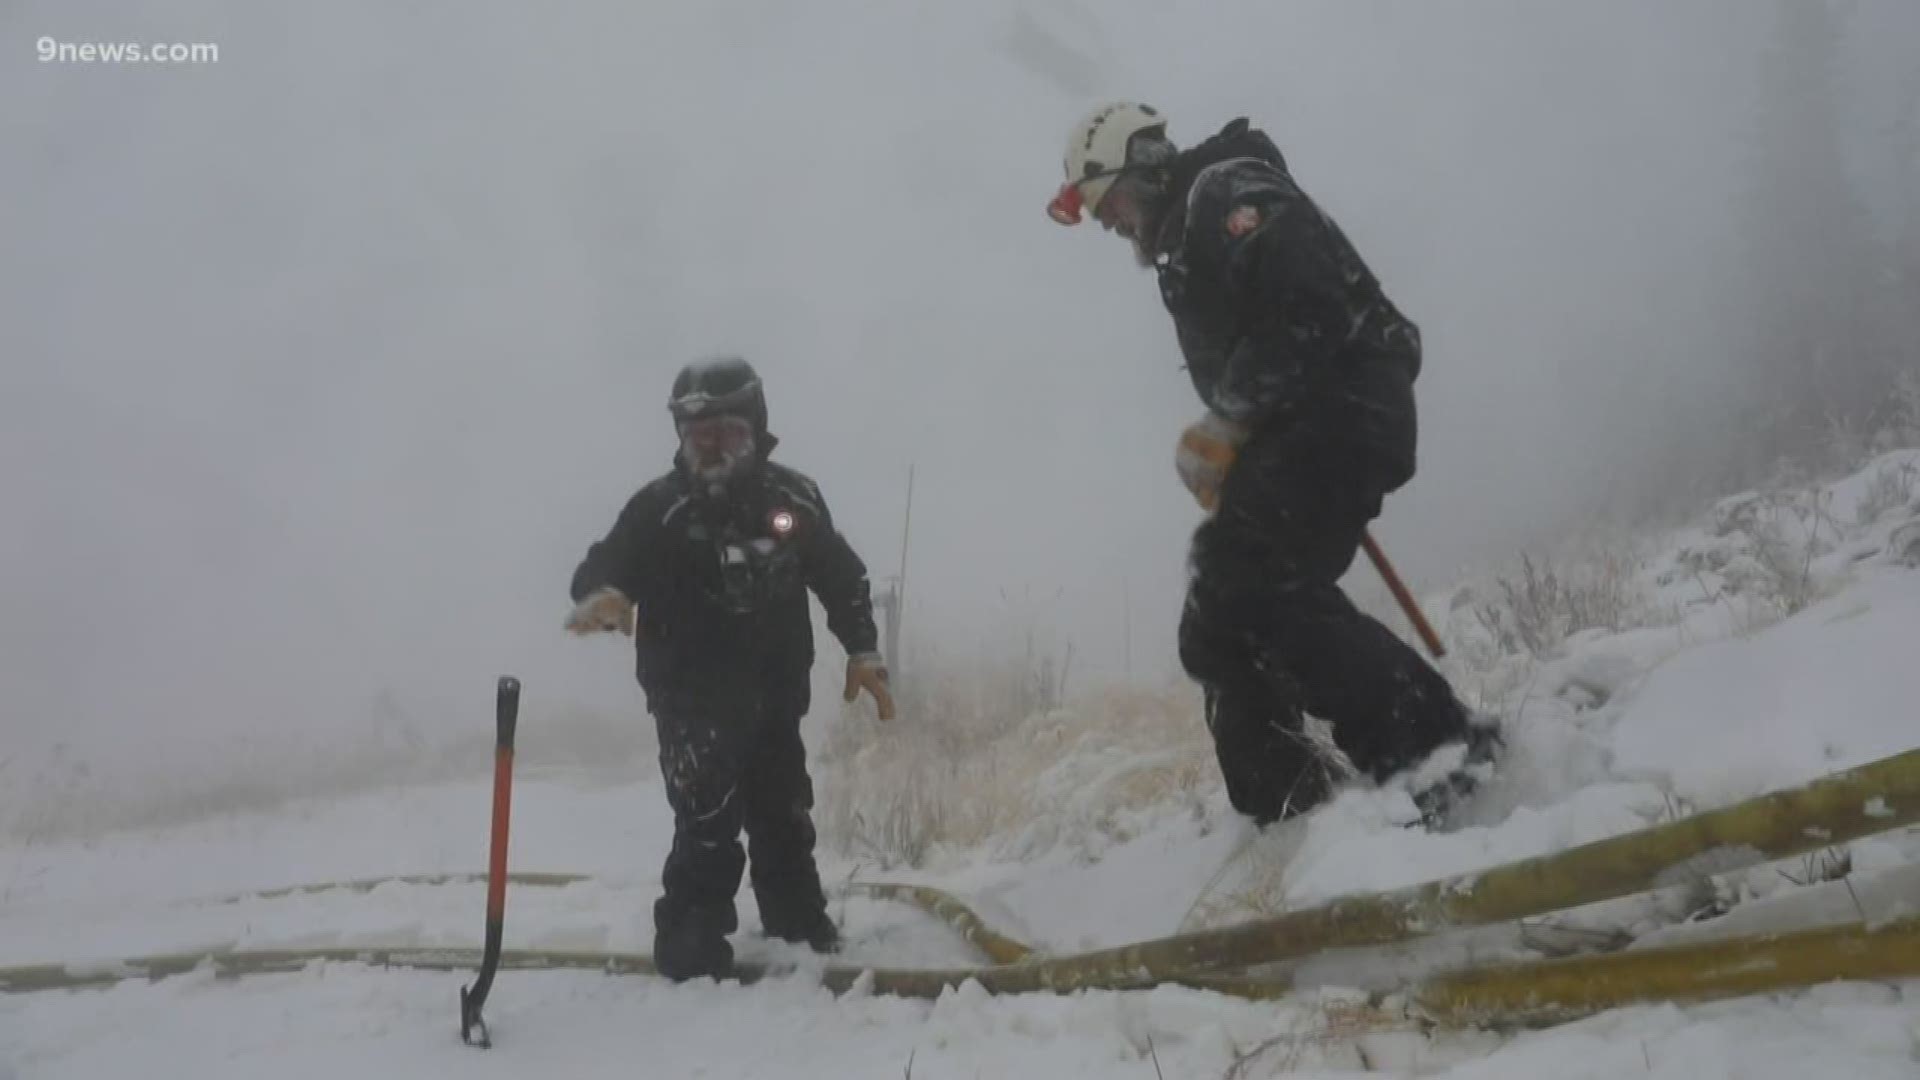 Meteorologist Cory Reppenhagen went to Eldora Mountain resort to talk to its crew about what's been so good about the snow-making conditions this season.